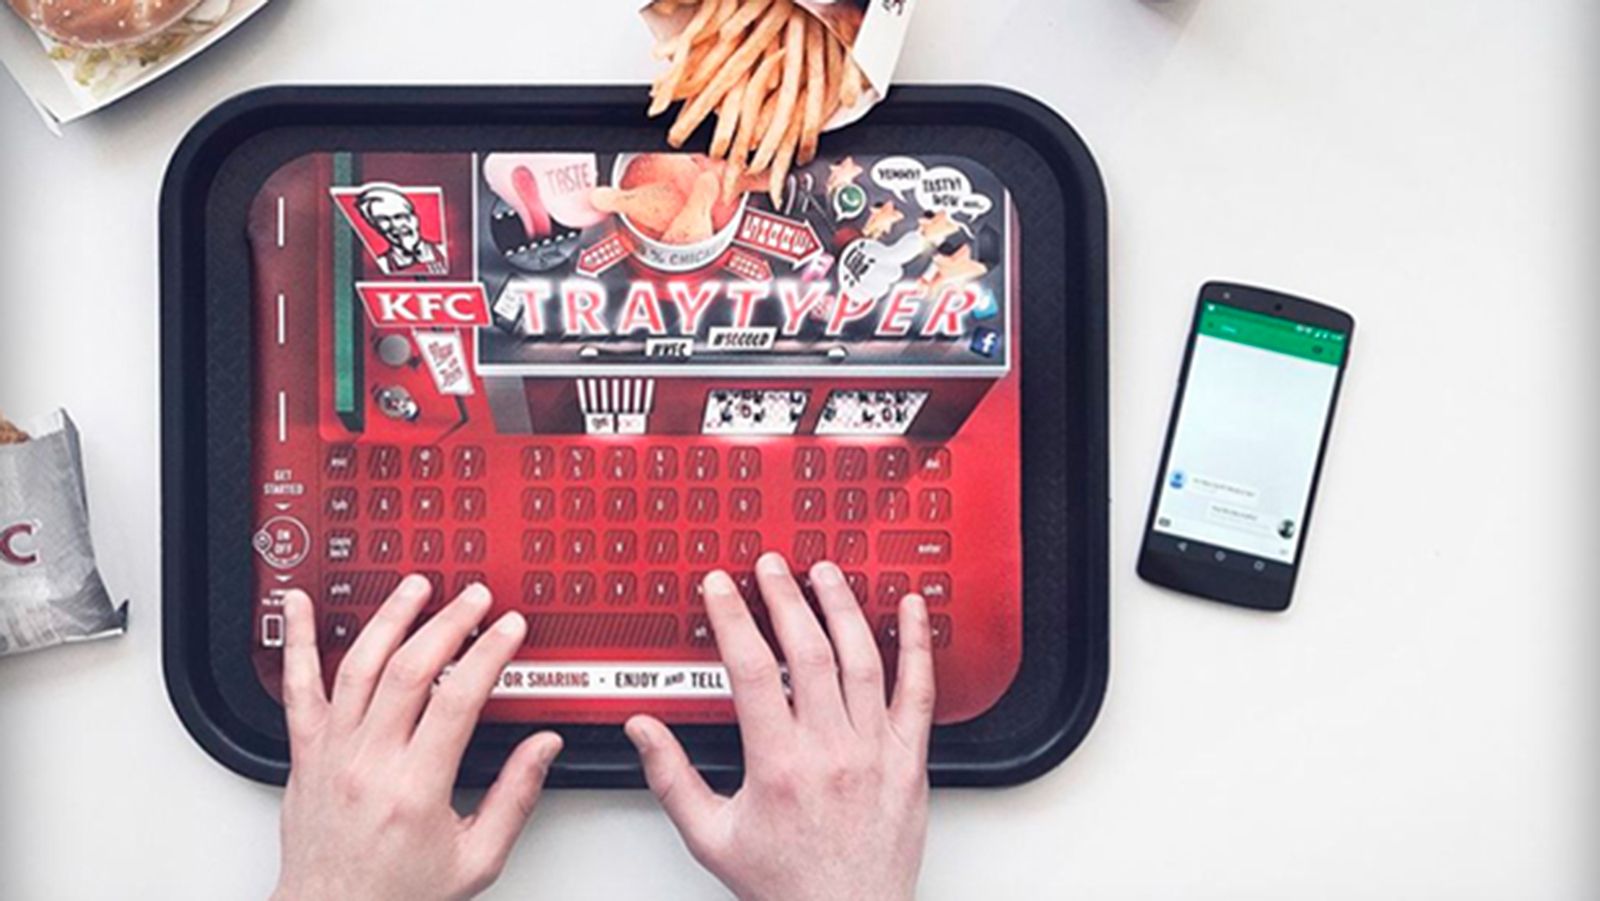 kfc offers paper thin bluetooth keyboard on meal tray greasy phone screen be gone image 1